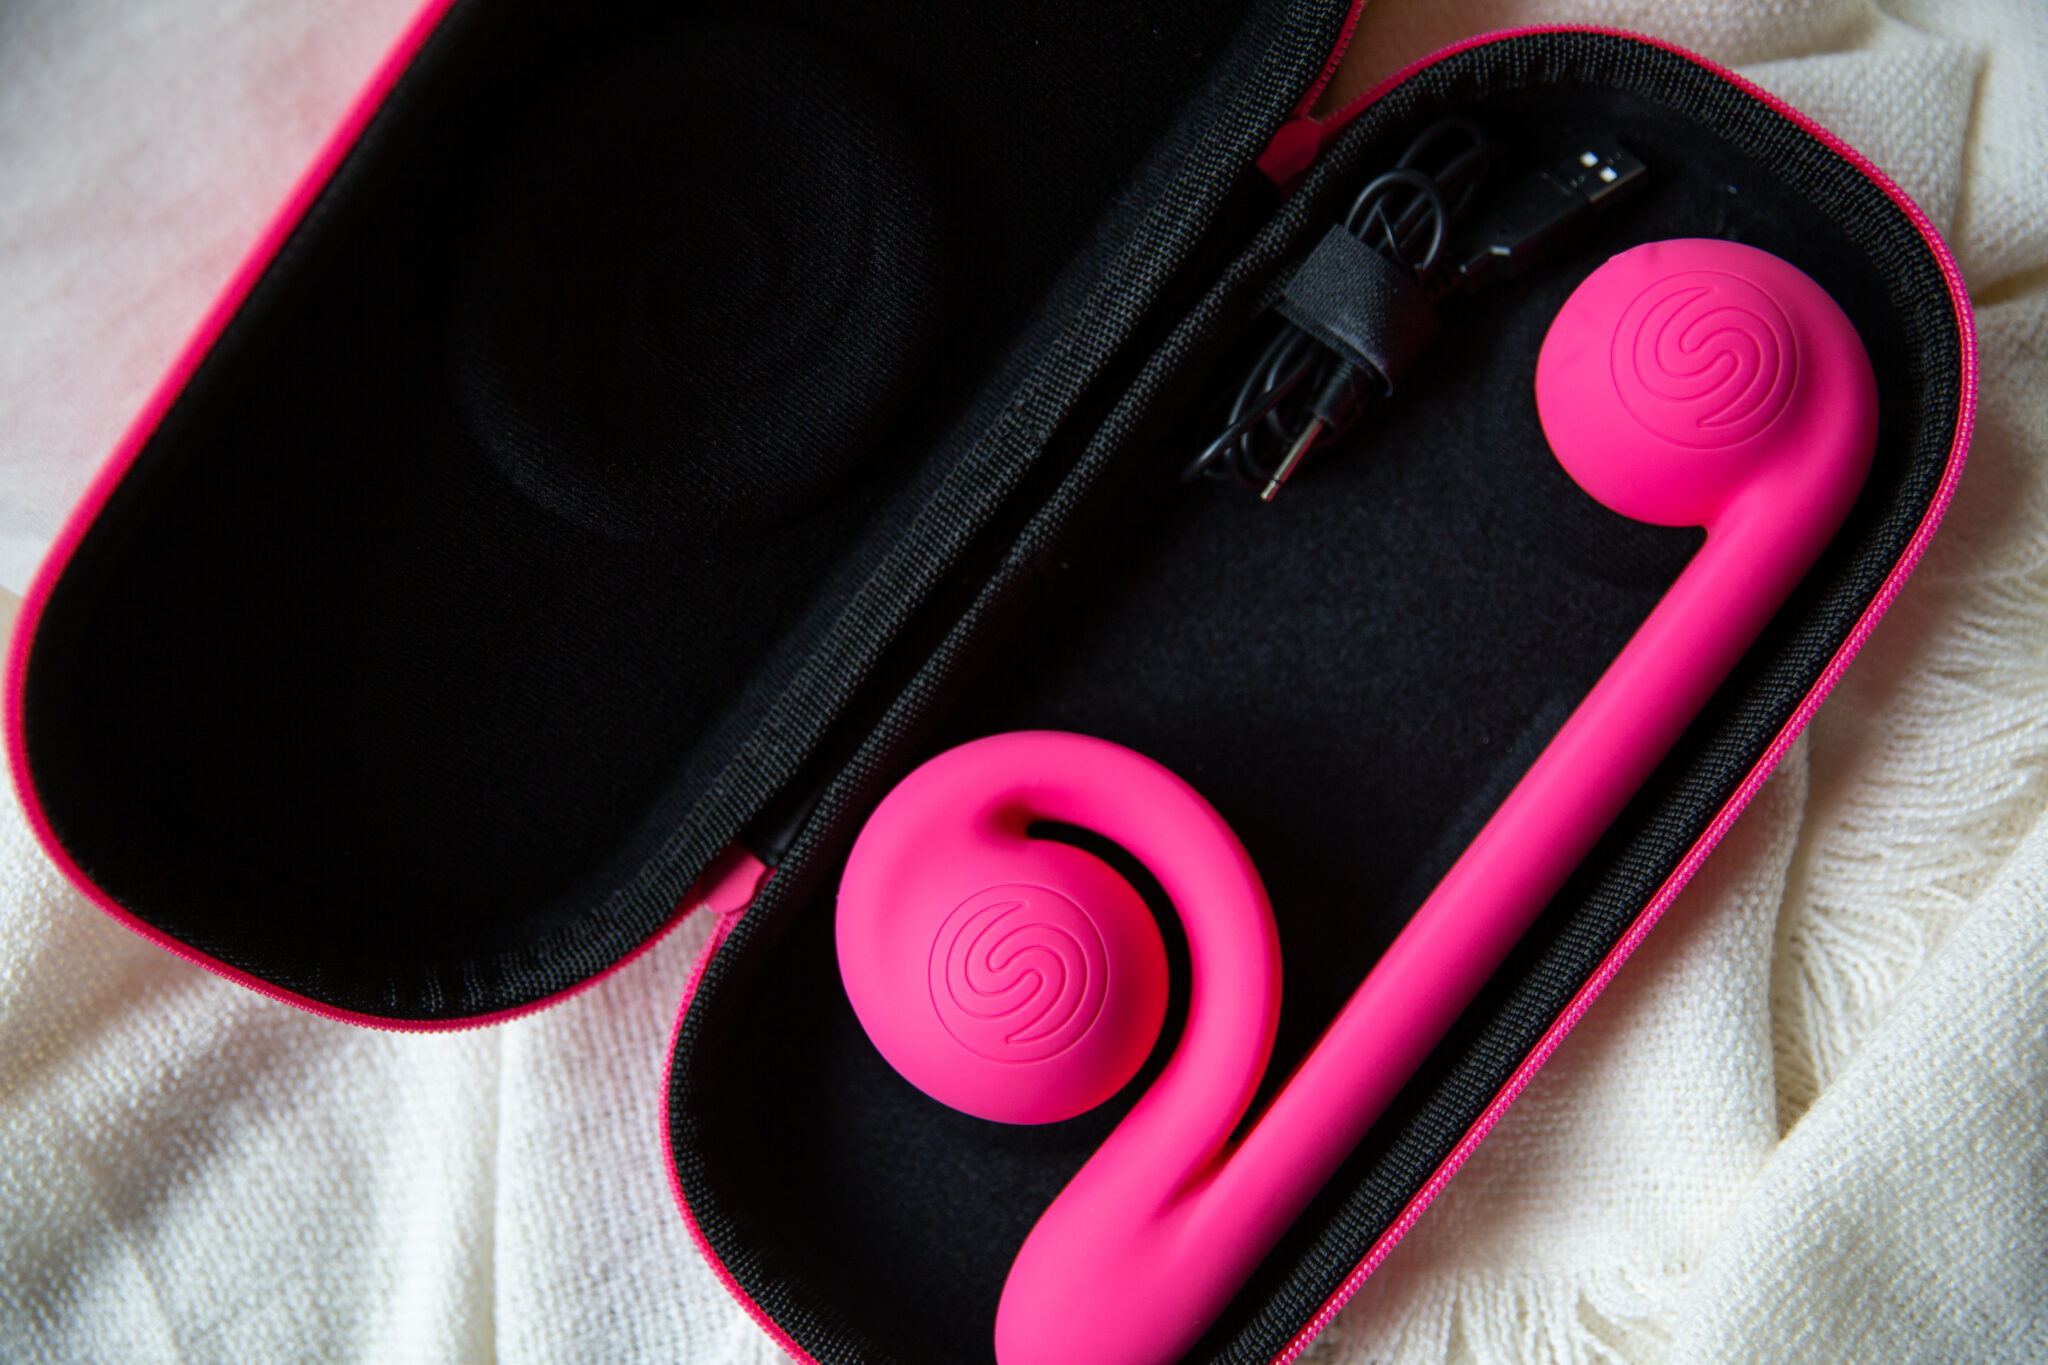 Snail Vibe vibrator in its hot pink case.